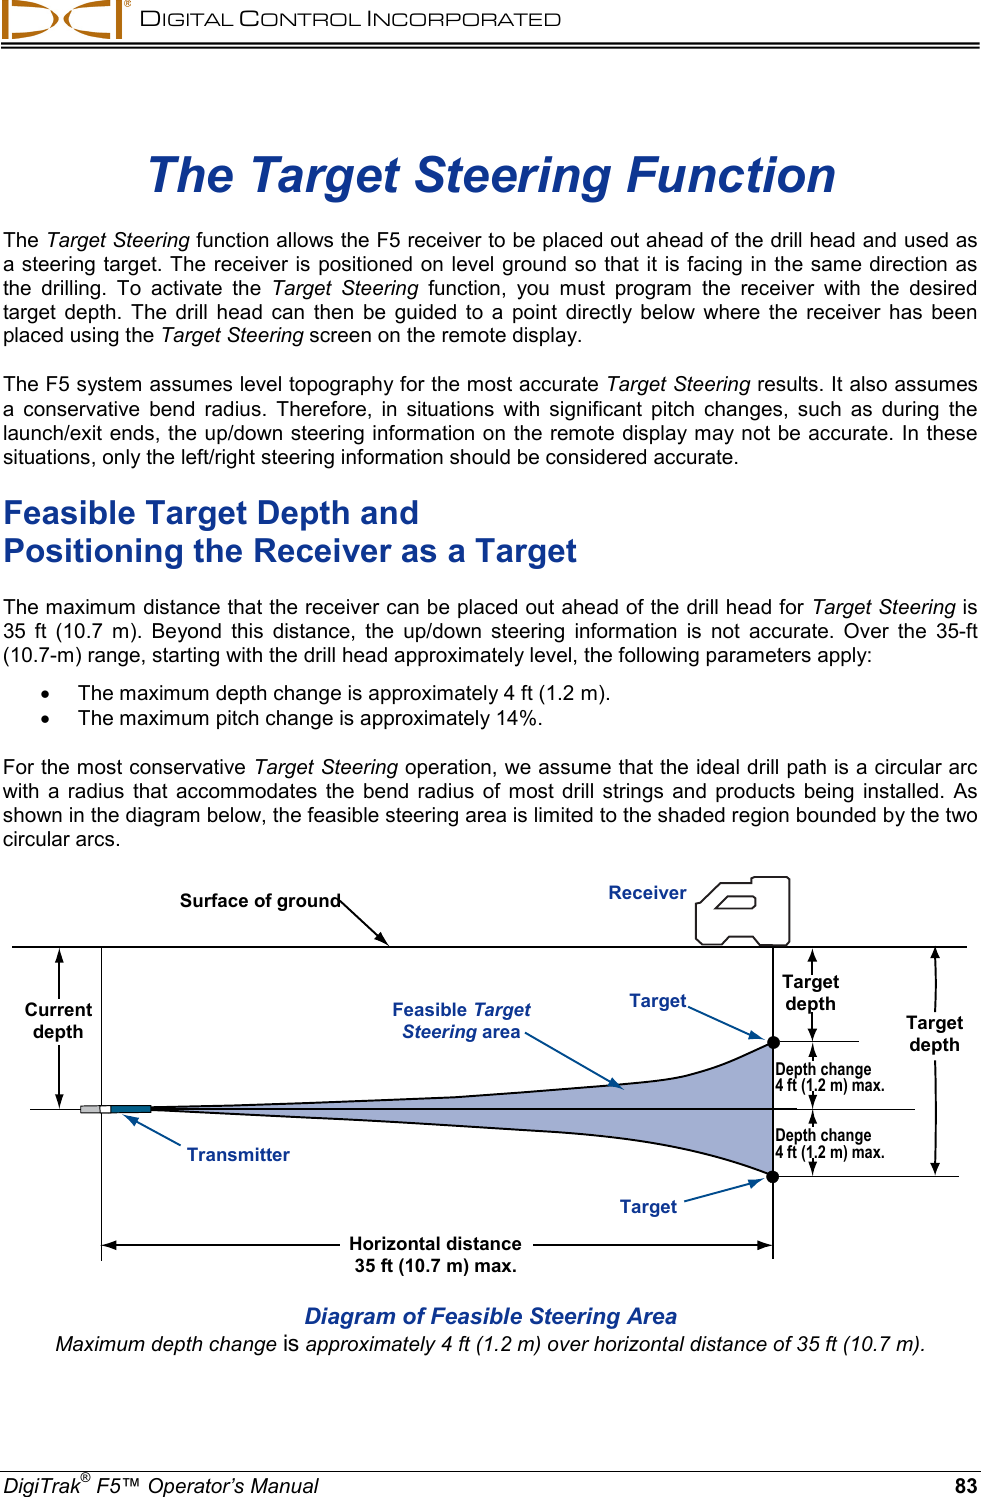  DIGITAL CONTROL INCORPORATED  DigiTrak® F5™ Operator’s Manual 83 The Target Steering Function The Target Steering function allows the F5 receiver to be placed out ahead of the drill head and used as a steering target. The receiver is positioned on level ground so that it is facing in the same direction as the drilling. To activate the Target Steering function, you must program the receiver with the desired target depth. The drill head can then be guided to a point directly below where the receiver has been placed using the Target Steering screen on the remote display. The F5 system assumes level topography for the most accurate Target Steering results. It also assumes a conservative bend radius. Therefore, in situations  with  significant pitch changes,  such as during the launch/exit ends, the up/down steering information on the remote display may not be accurate. In these situations, only the left/right steering information should be considered accurate.  Feasible Target Depth and  Positioning the Receiver as a Target The maximum distance that the receiver can be placed out ahead of the drill head for Target Steering is 35 ft (10.7 m). Beyond  this distance, the up/down steering  information  is not accurate.  Over  the  35-ft (10.7-m) range, starting with the drill head approximately level, the following parameters apply: • The maximum depth change is approximately 4 ft (1.2 m).  • The maximum pitch change is approximately 14%. For the most conservative Target Steering operation, we assume that the ideal drill path is a circular arc with a radius that accommodates the bend radius of most drill strings and products being installed. As shown in the diagram below, the feasible steering area is limited to the shaded region bounded by the two circular arcs.  Diagram of Feasible Steering Area Maximum depth change is approximately 4 ft (1.2 m) over horizontal distance of 35 ft (10.7 m). Surface of ground Receiver Target Target Feasible Target Steering area Transmitter Current depth Horizontal distance  35 ft (10.7 m) max. Depth change  4 ft (1.2 m) max. Target depth Target depth Depth change  4 ft (1.2 m) max.  